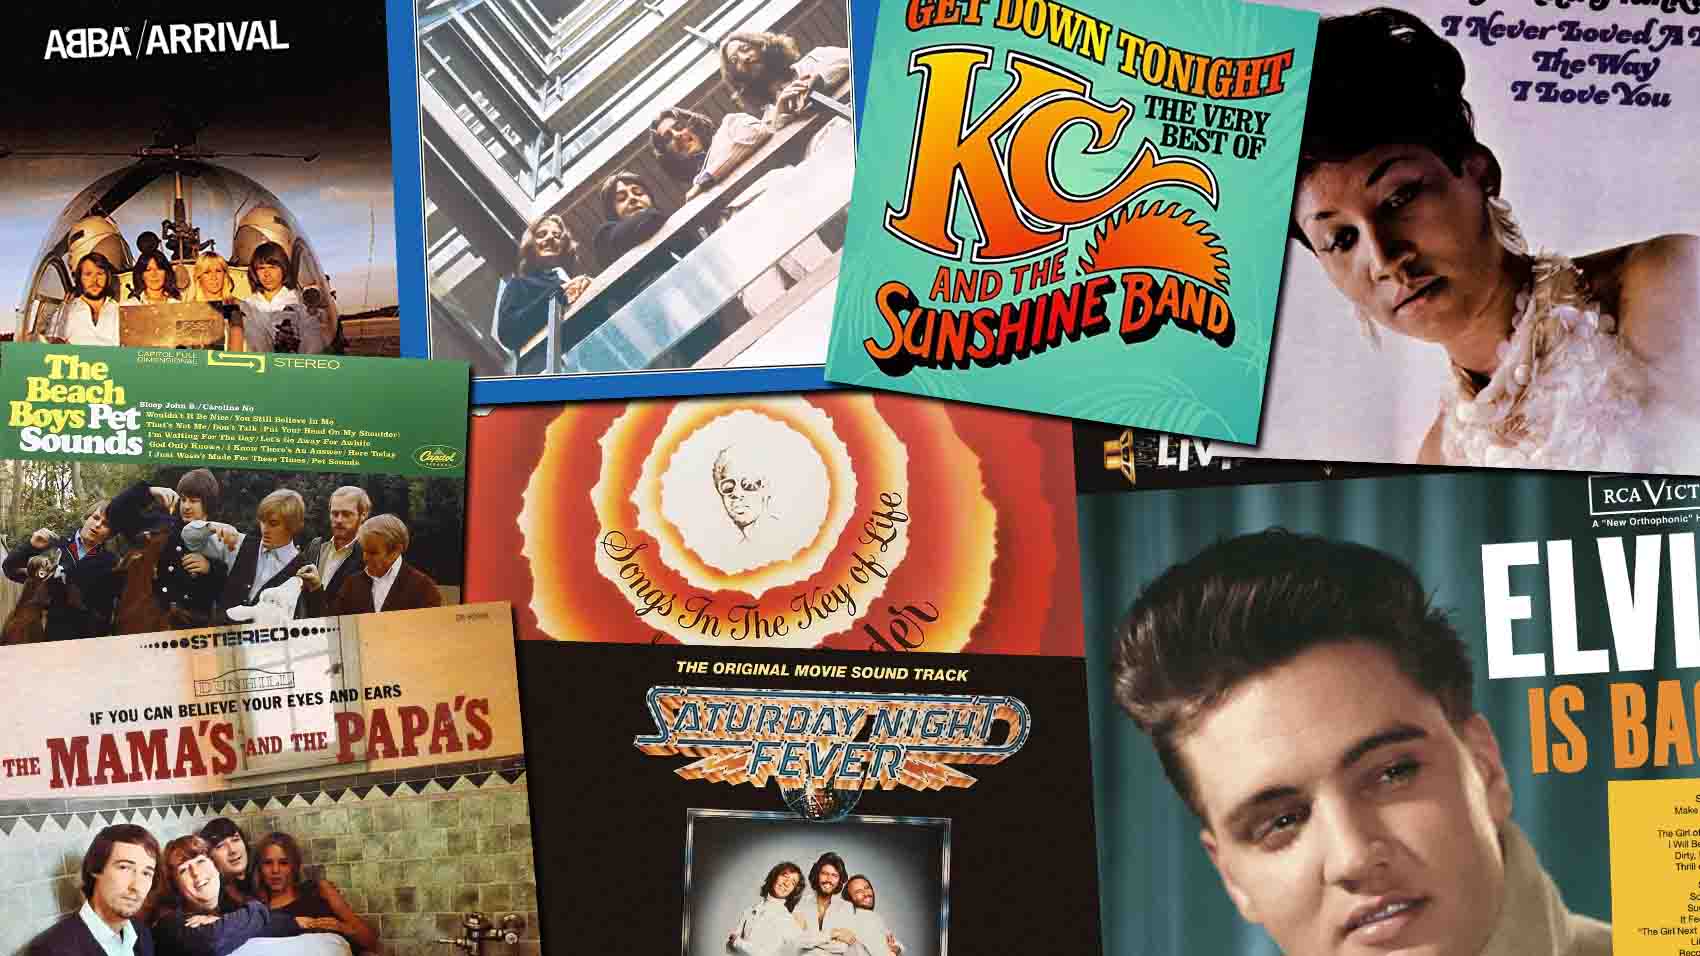 Greatest Hits of the 60s and 70s!